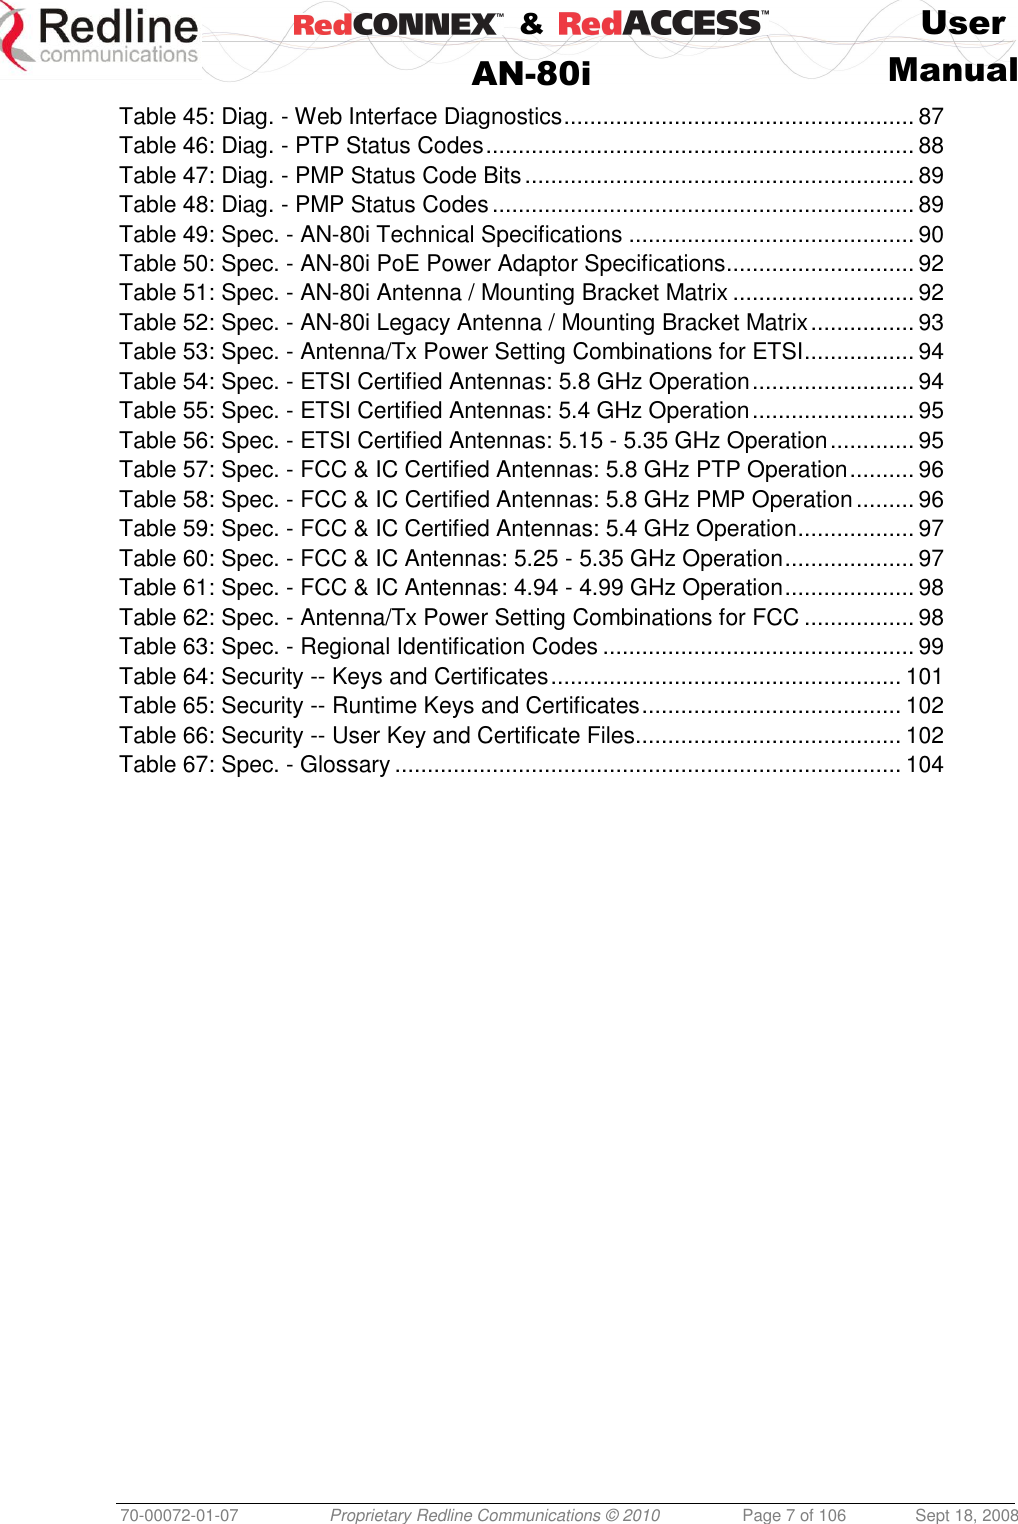    &amp;  User  AN-80i Manual  70-00072-01-07 Proprietary Redline Communications © 2010  Page 7 of 106  Sept 18, 2008 Table 45: Diag. - Web Interface Diagnostics ...................................................... 87 Table 46: Diag. - PTP Status Codes .................................................................. 88 Table 47: Diag. - PMP Status Code Bits ............................................................ 89 Table 48: Diag. - PMP Status Codes ................................................................. 89 Table 49: Spec. - AN-80i Technical Specifications ............................................ 90 Table 50: Spec. - AN-80i PoE Power Adaptor Specifications ............................. 92 Table 51: Spec. - AN-80i Antenna / Mounting Bracket Matrix ............................ 92 Table 52: Spec. - AN-80i Legacy Antenna / Mounting Bracket Matrix ................ 93 Table 53: Spec. - Antenna/Tx Power Setting Combinations for ETSI ................. 94 Table 54: Spec. - ETSI Certified Antennas: 5.8 GHz Operation ......................... 94 Table 55: Spec. - ETSI Certified Antennas: 5.4 GHz Operation ......................... 95 Table 56: Spec. - ETSI Certified Antennas: 5.15 - 5.35 GHz Operation ............. 95 Table 57: Spec. - FCC &amp; IC Certified Antennas: 5.8 GHz PTP Operation .......... 96 Table 58: Spec. - FCC &amp; IC Certified Antennas: 5.8 GHz PMP Operation ......... 96 Table 59: Spec. - FCC &amp; IC Certified Antennas: 5.4 GHz Operation .................. 97 Table 60: Spec. - FCC &amp; IC Antennas: 5.25 - 5.35 GHz Operation .................... 97 Table 61: Spec. - FCC &amp; IC Antennas: 4.94 - 4.99 GHz Operation .................... 98 Table 62: Spec. - Antenna/Tx Power Setting Combinations for FCC ................. 98 Table 63: Spec. - Regional Identification Codes ................................................ 99 Table 64: Security -- Keys and Certificates ...................................................... 101 Table 65: Security -- Runtime Keys and Certificates ........................................ 102 Table 66: Security -- User Key and Certificate Files......................................... 102 Table 67: Spec. - Glossary .............................................................................. 104   